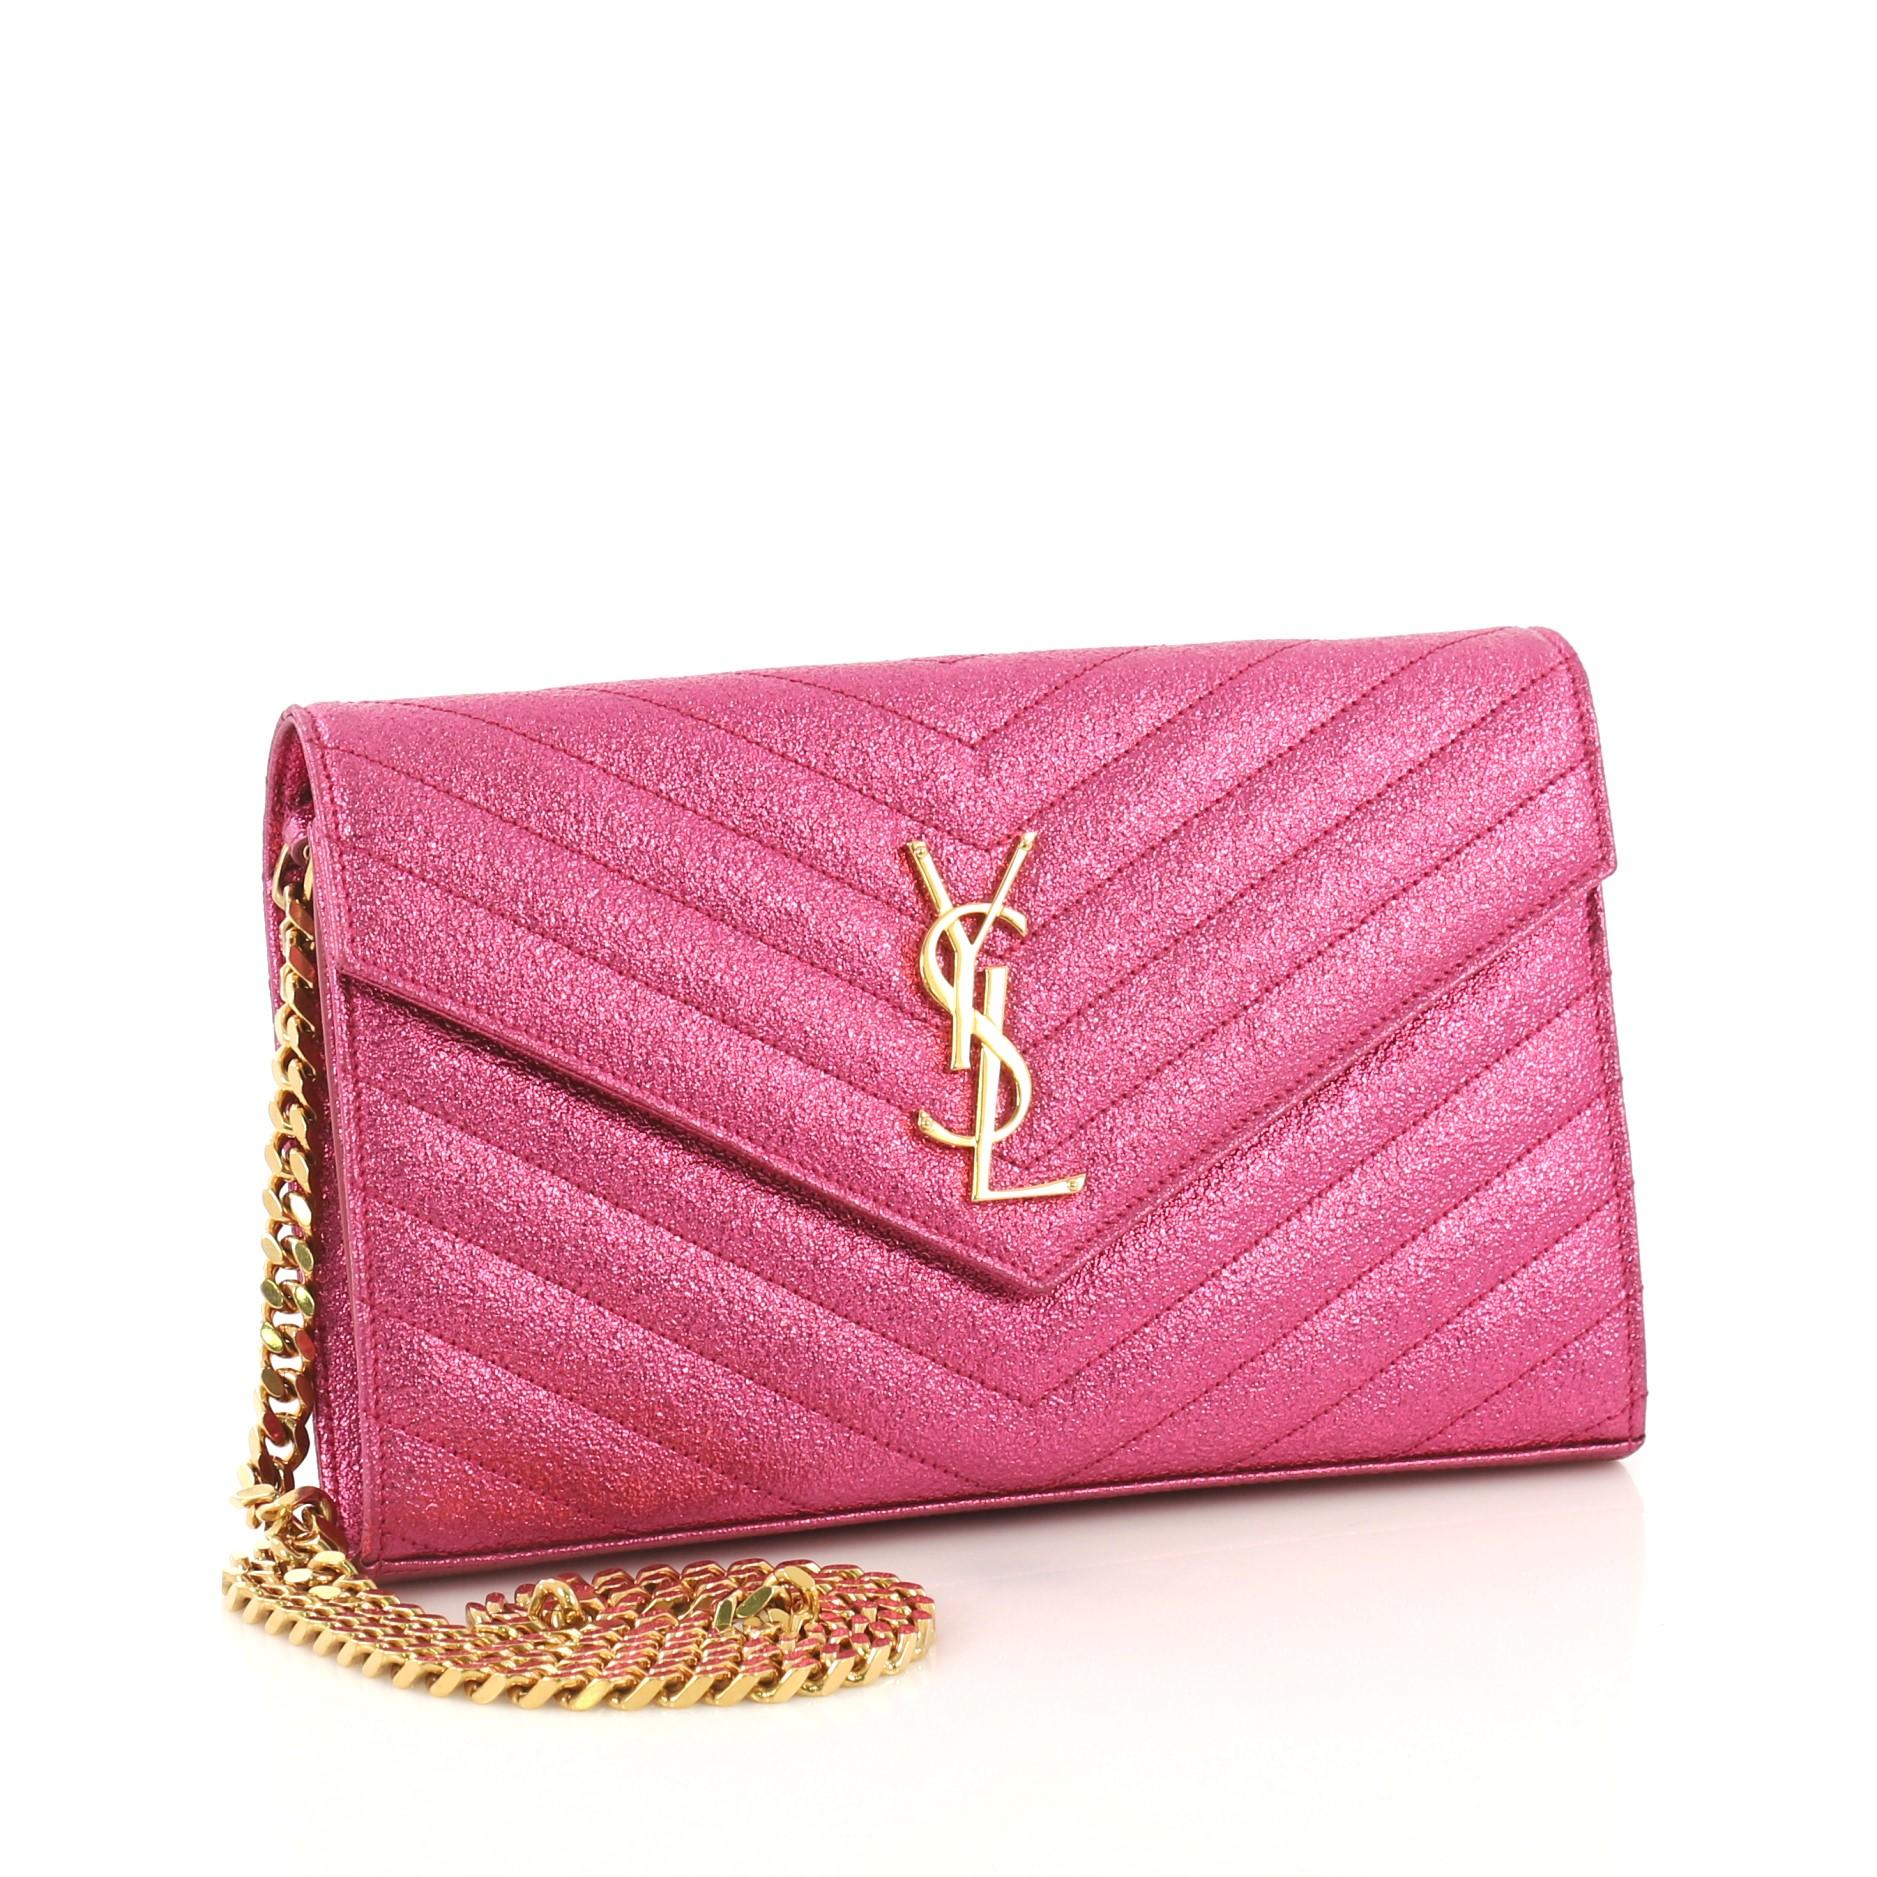 This Saint Laurent Classic Monogram Wallet on Chain Matelasse Chevron Metallic Leather Medium, crafted from pink matelasse chevron metallic leather, features a chain link strap, YSL monogram logo at the front, and gold-tone hardware. Its hidden